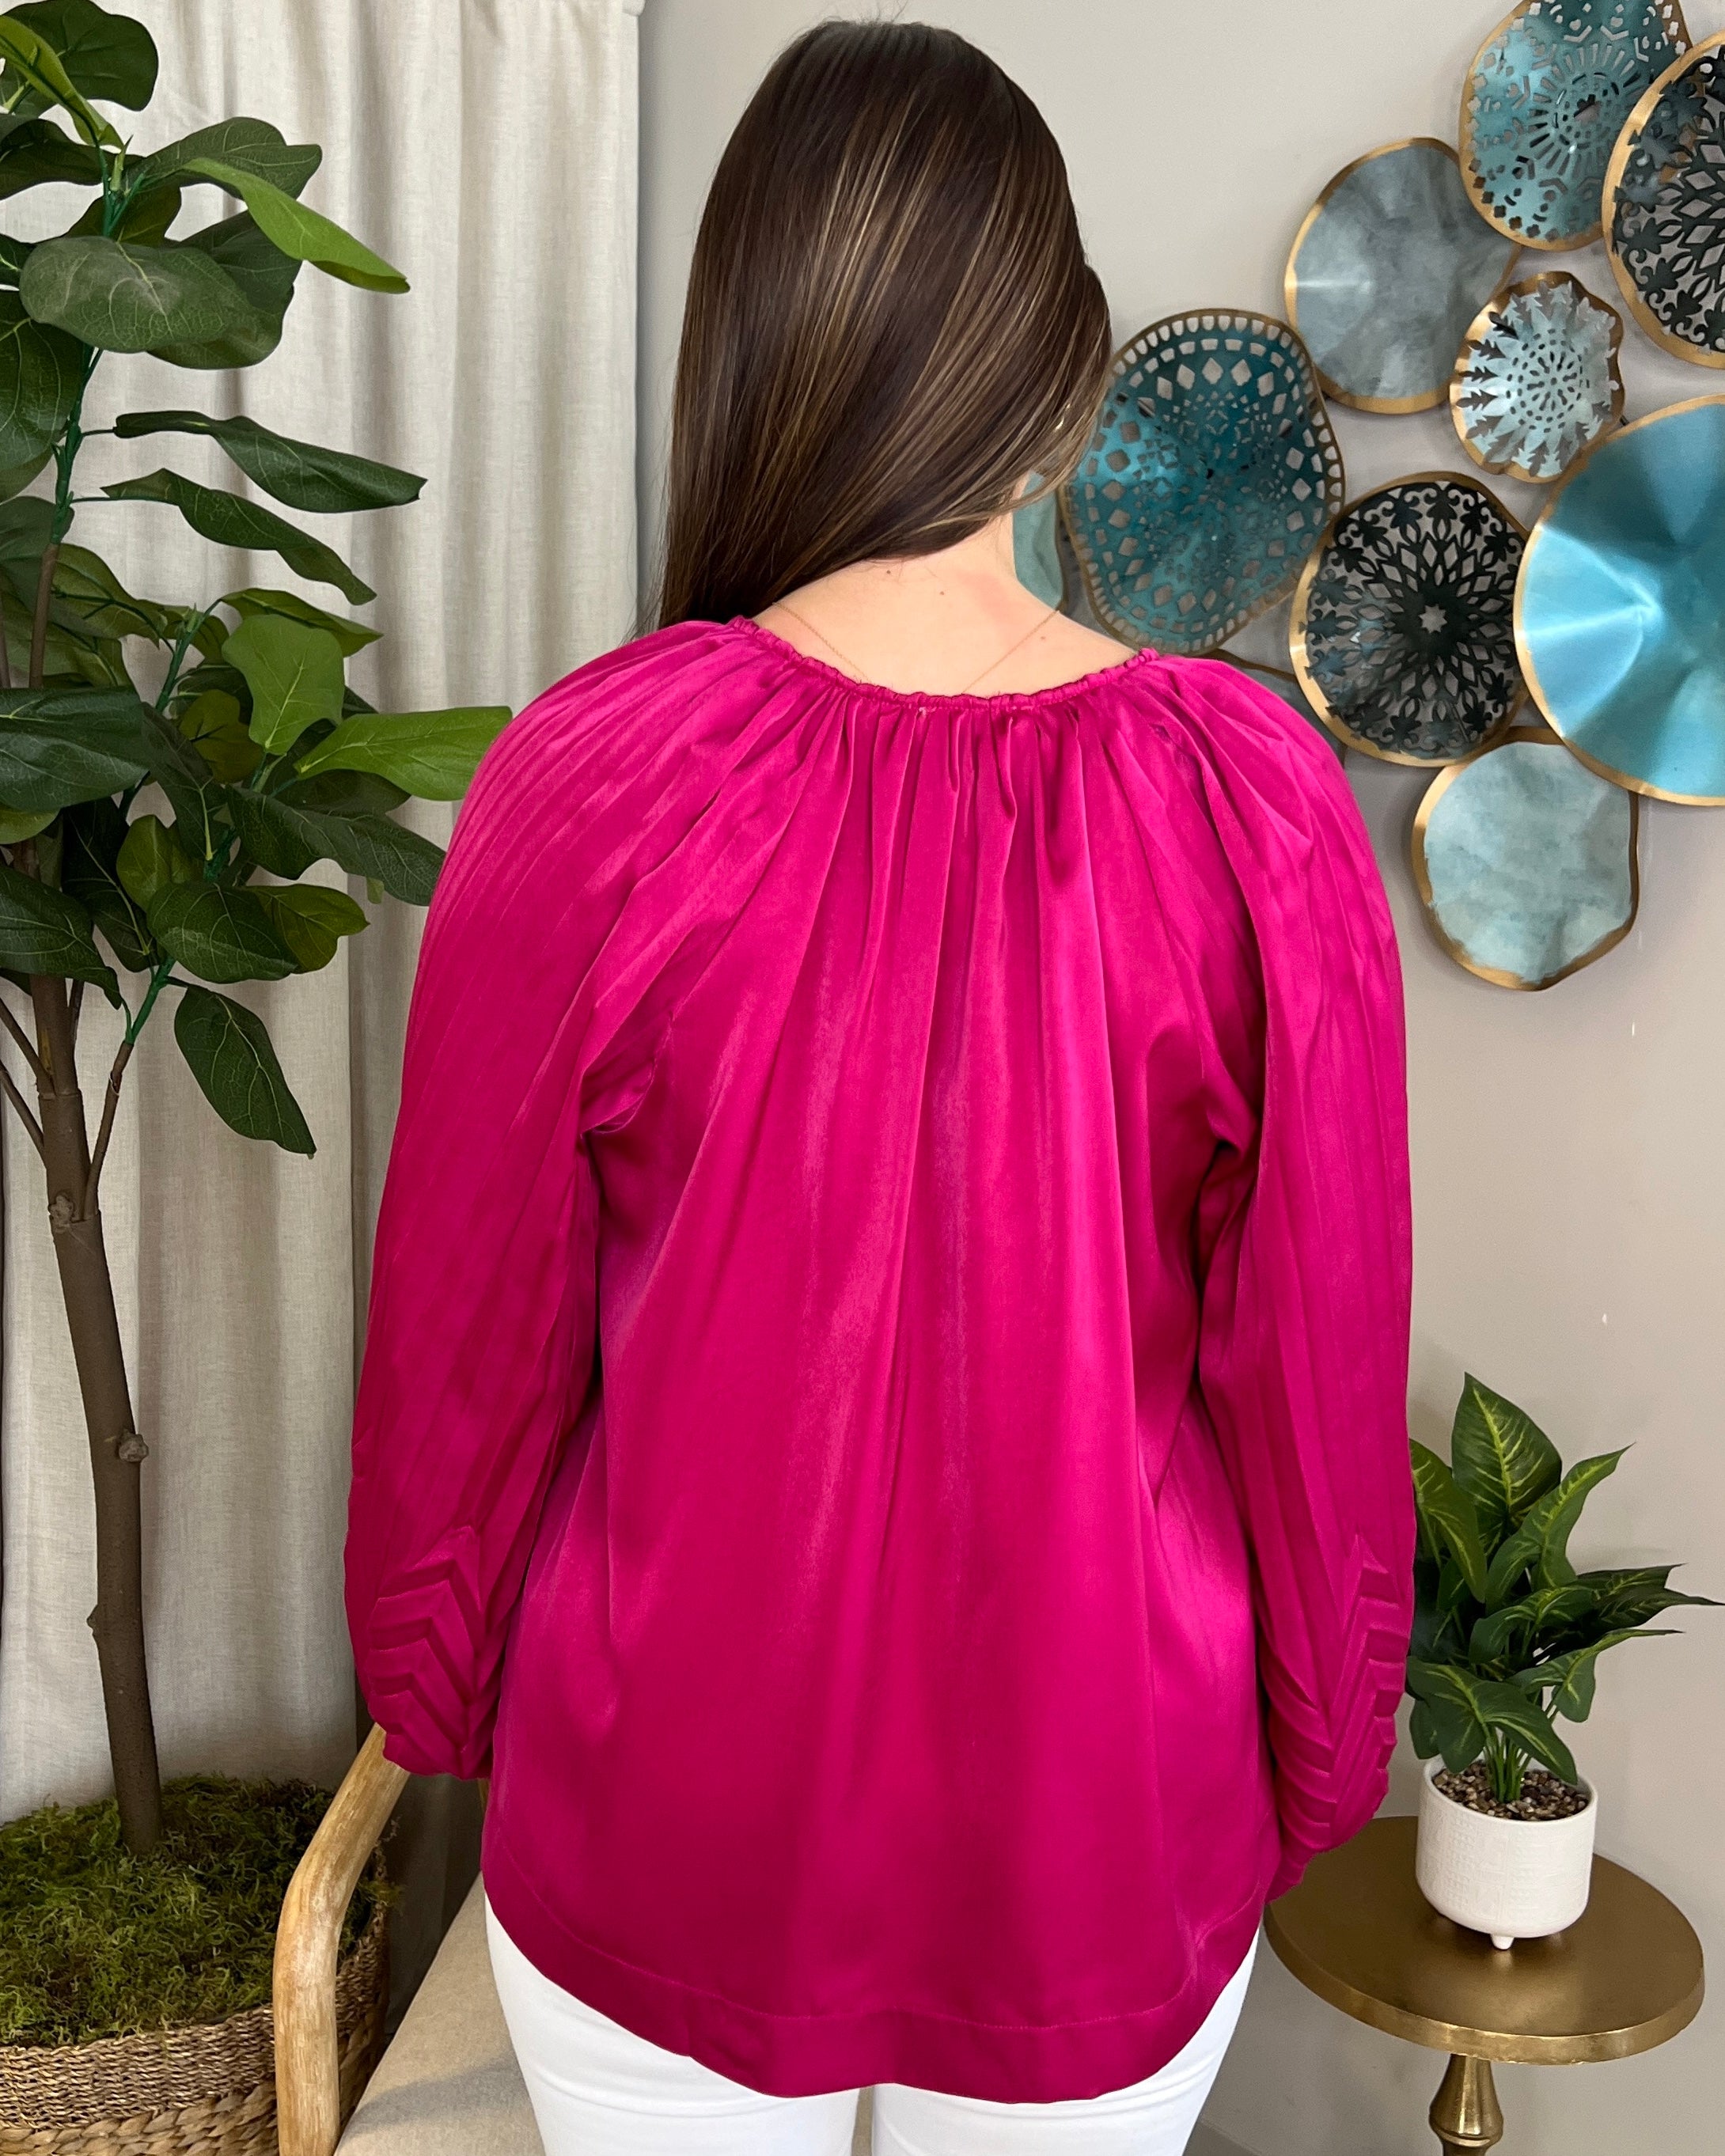 Opening Act Magenta Pleated Top-Shop-Womens-Boutique-Clothing